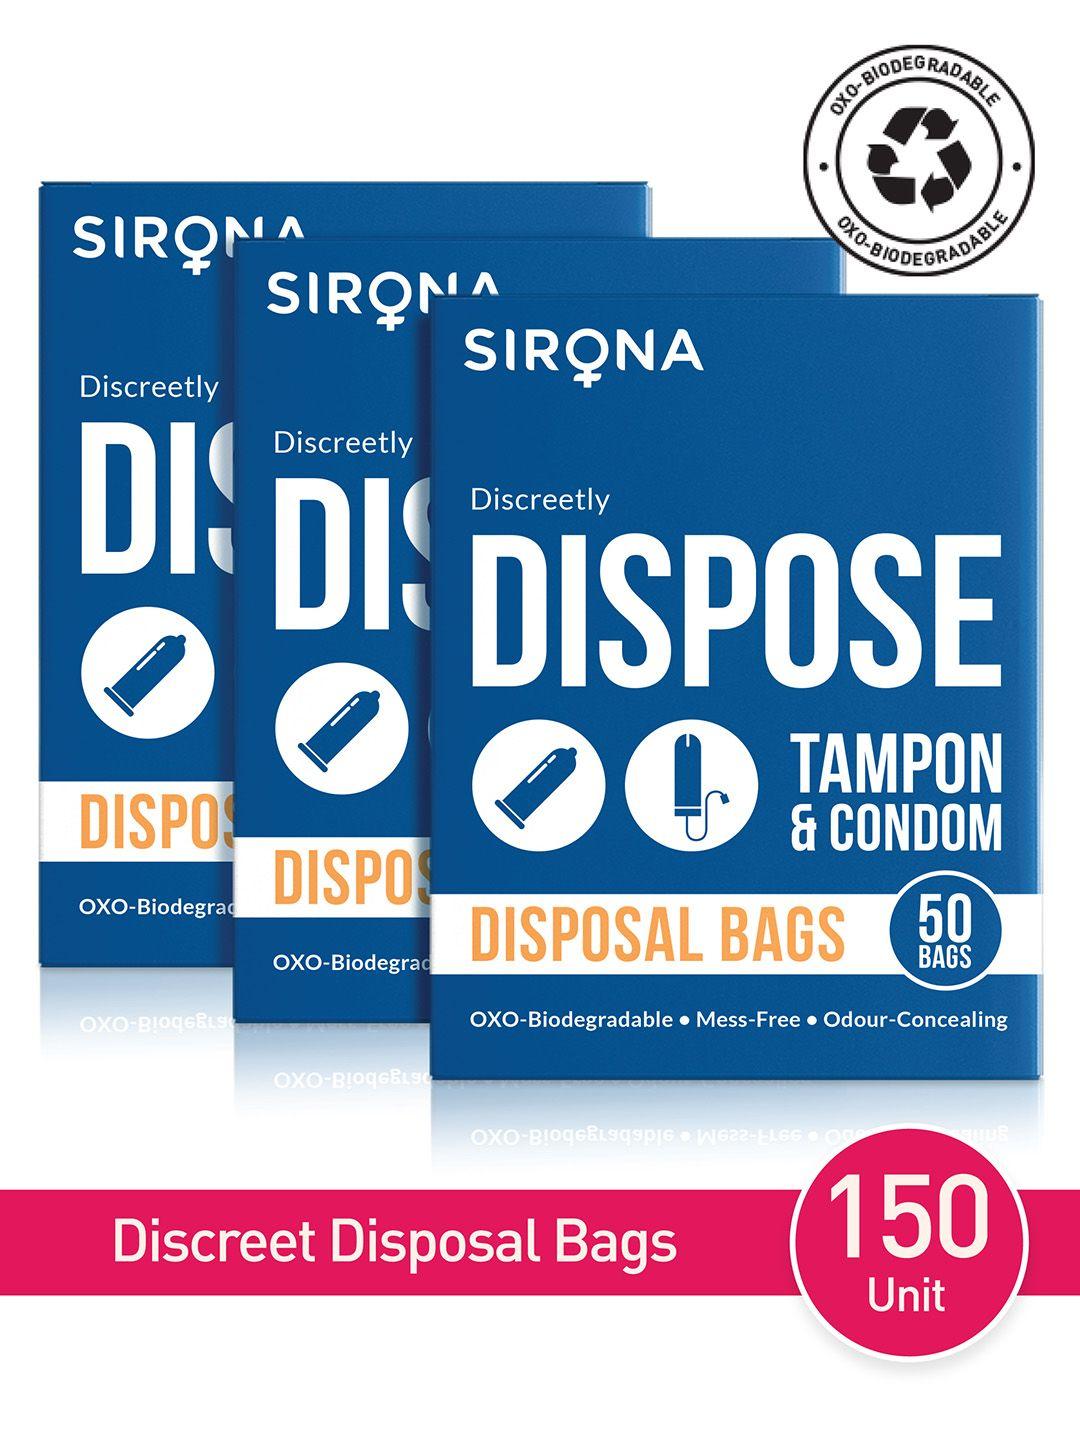 sirona-unisex-pack-of-3-tampons-and-condoms-disposal-bags---50-bags-each